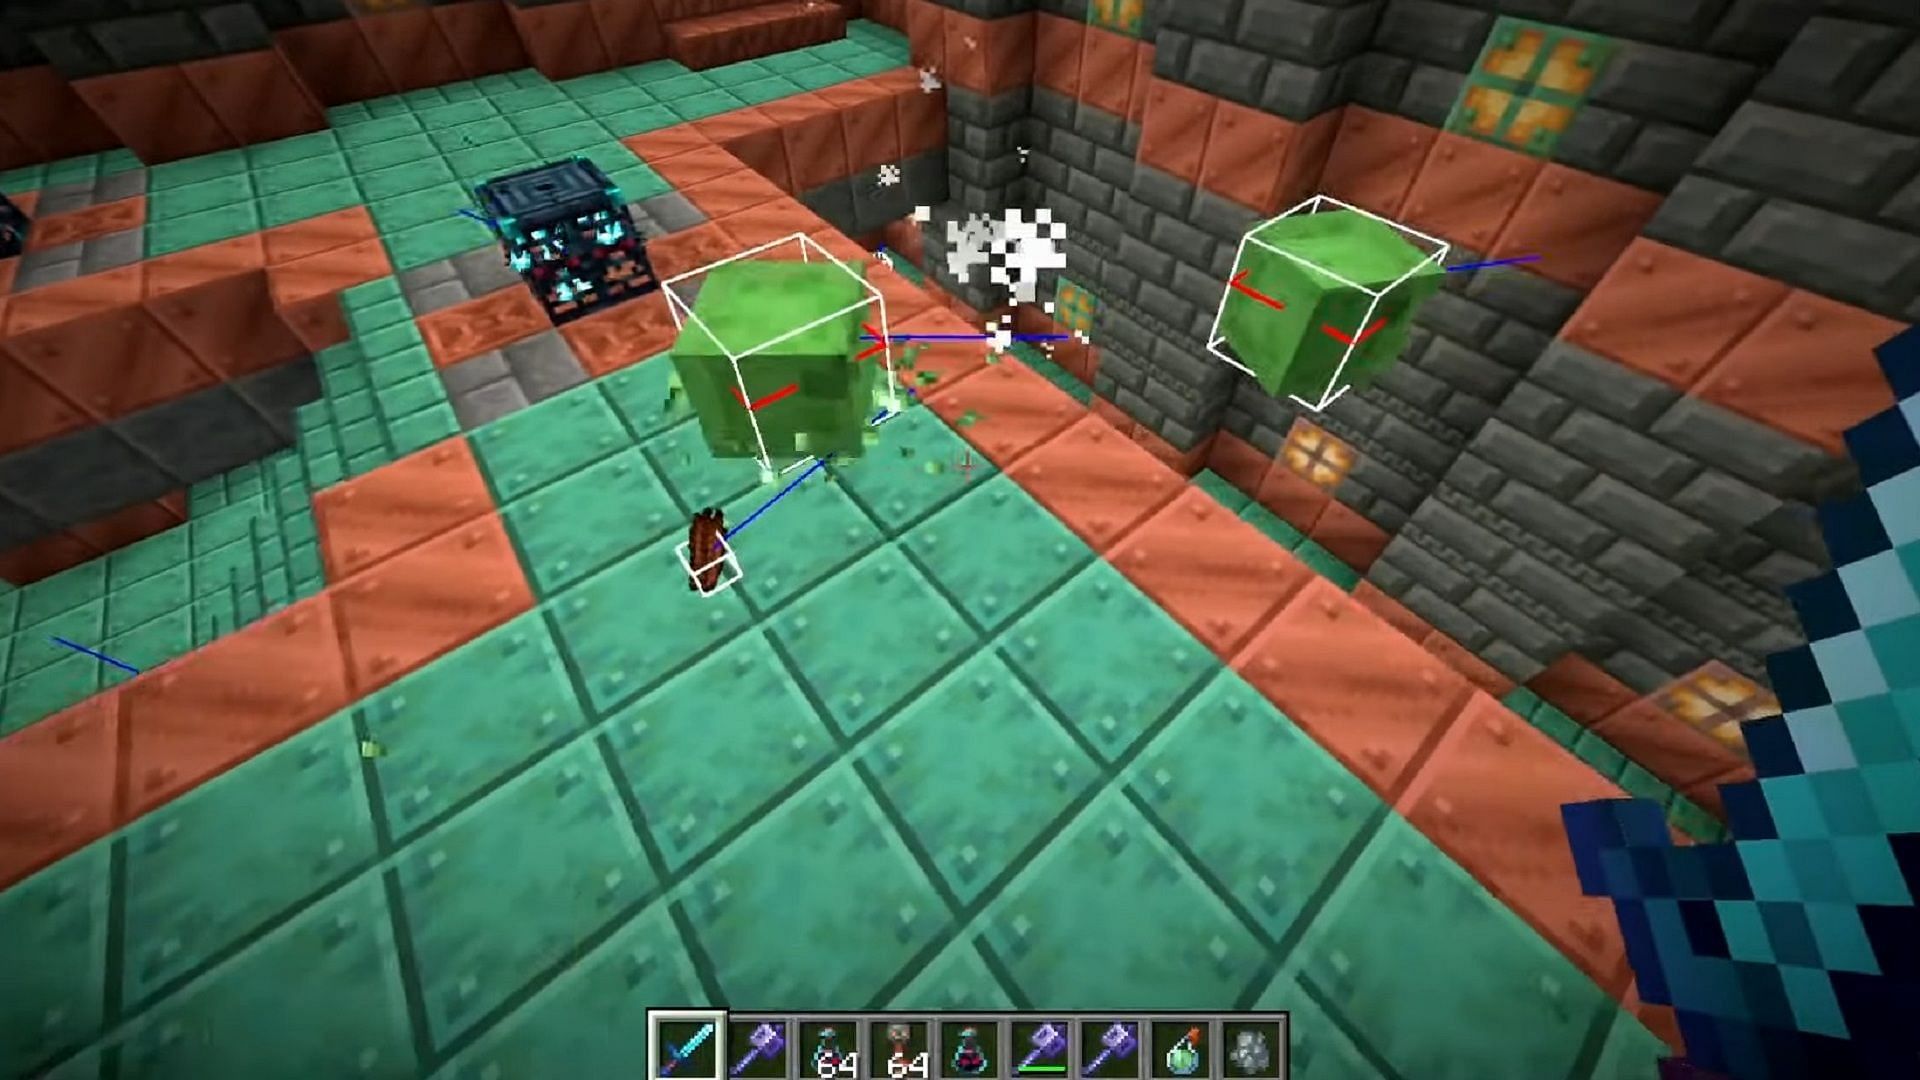 A zombie is killed in Minecraft, spawning two slimes thanks to the Oozing effect (Image via Rays Works/YouTube)